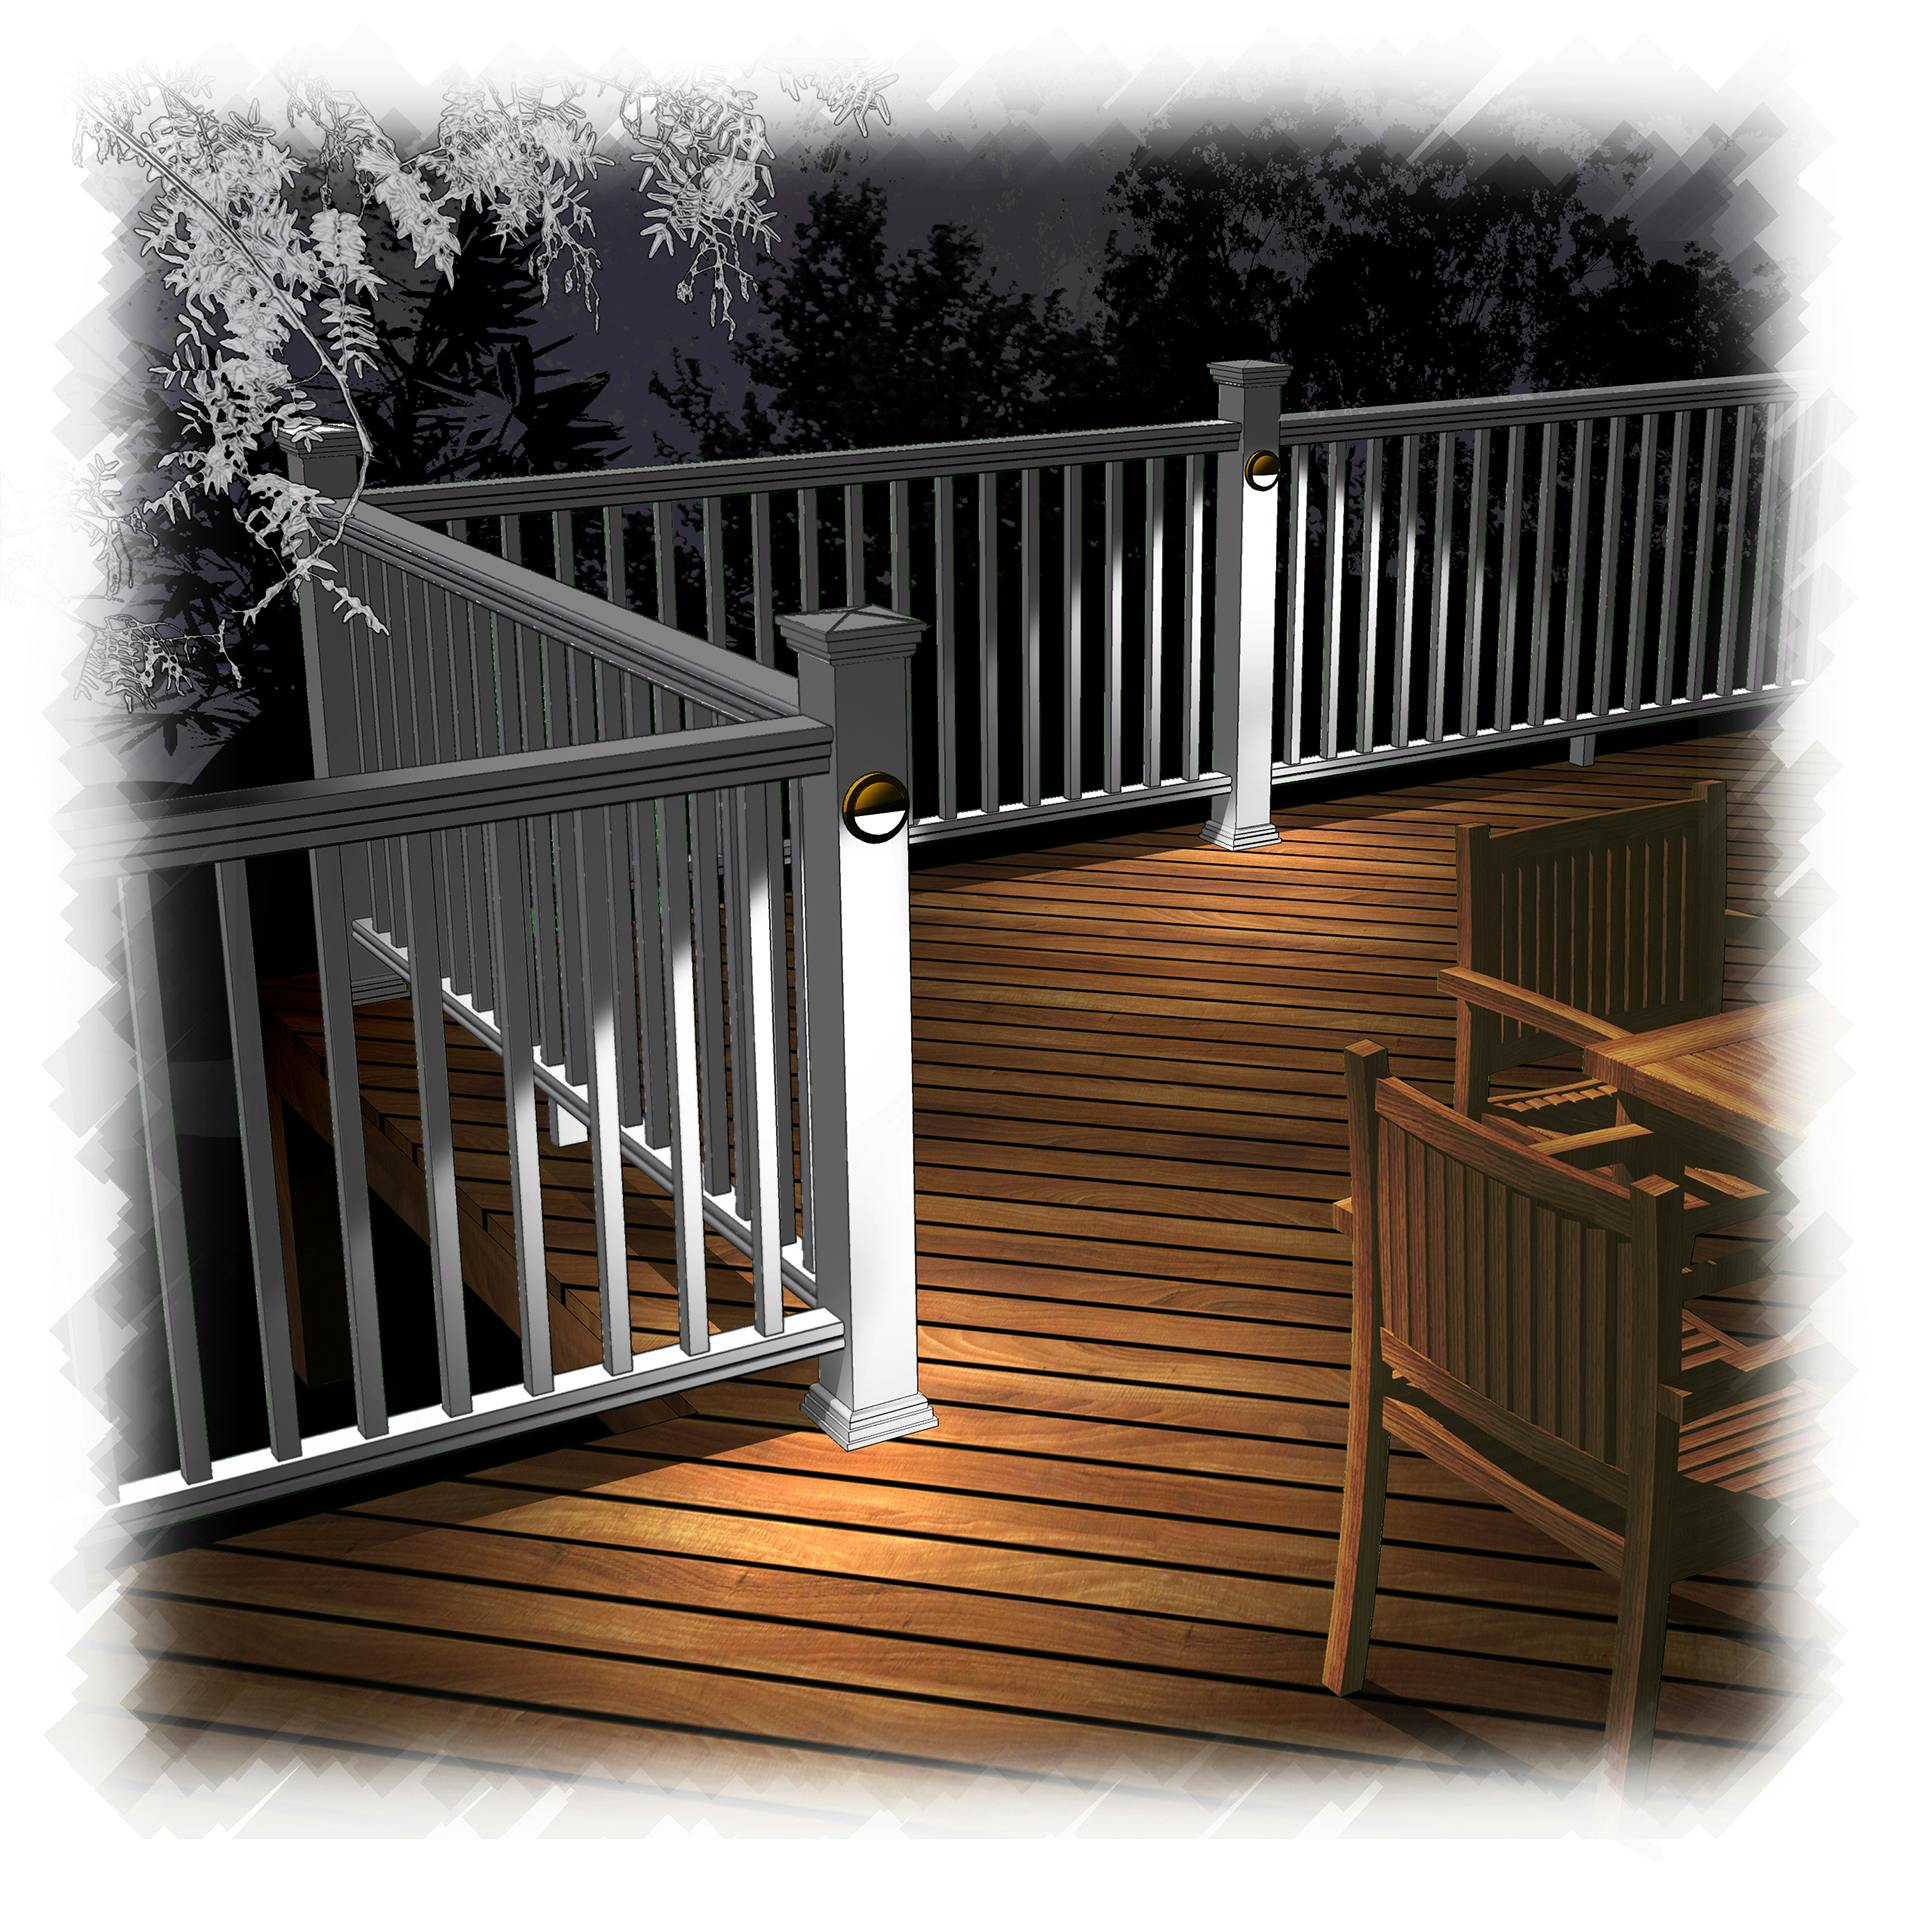 Illustration of a deck with downlights on posts